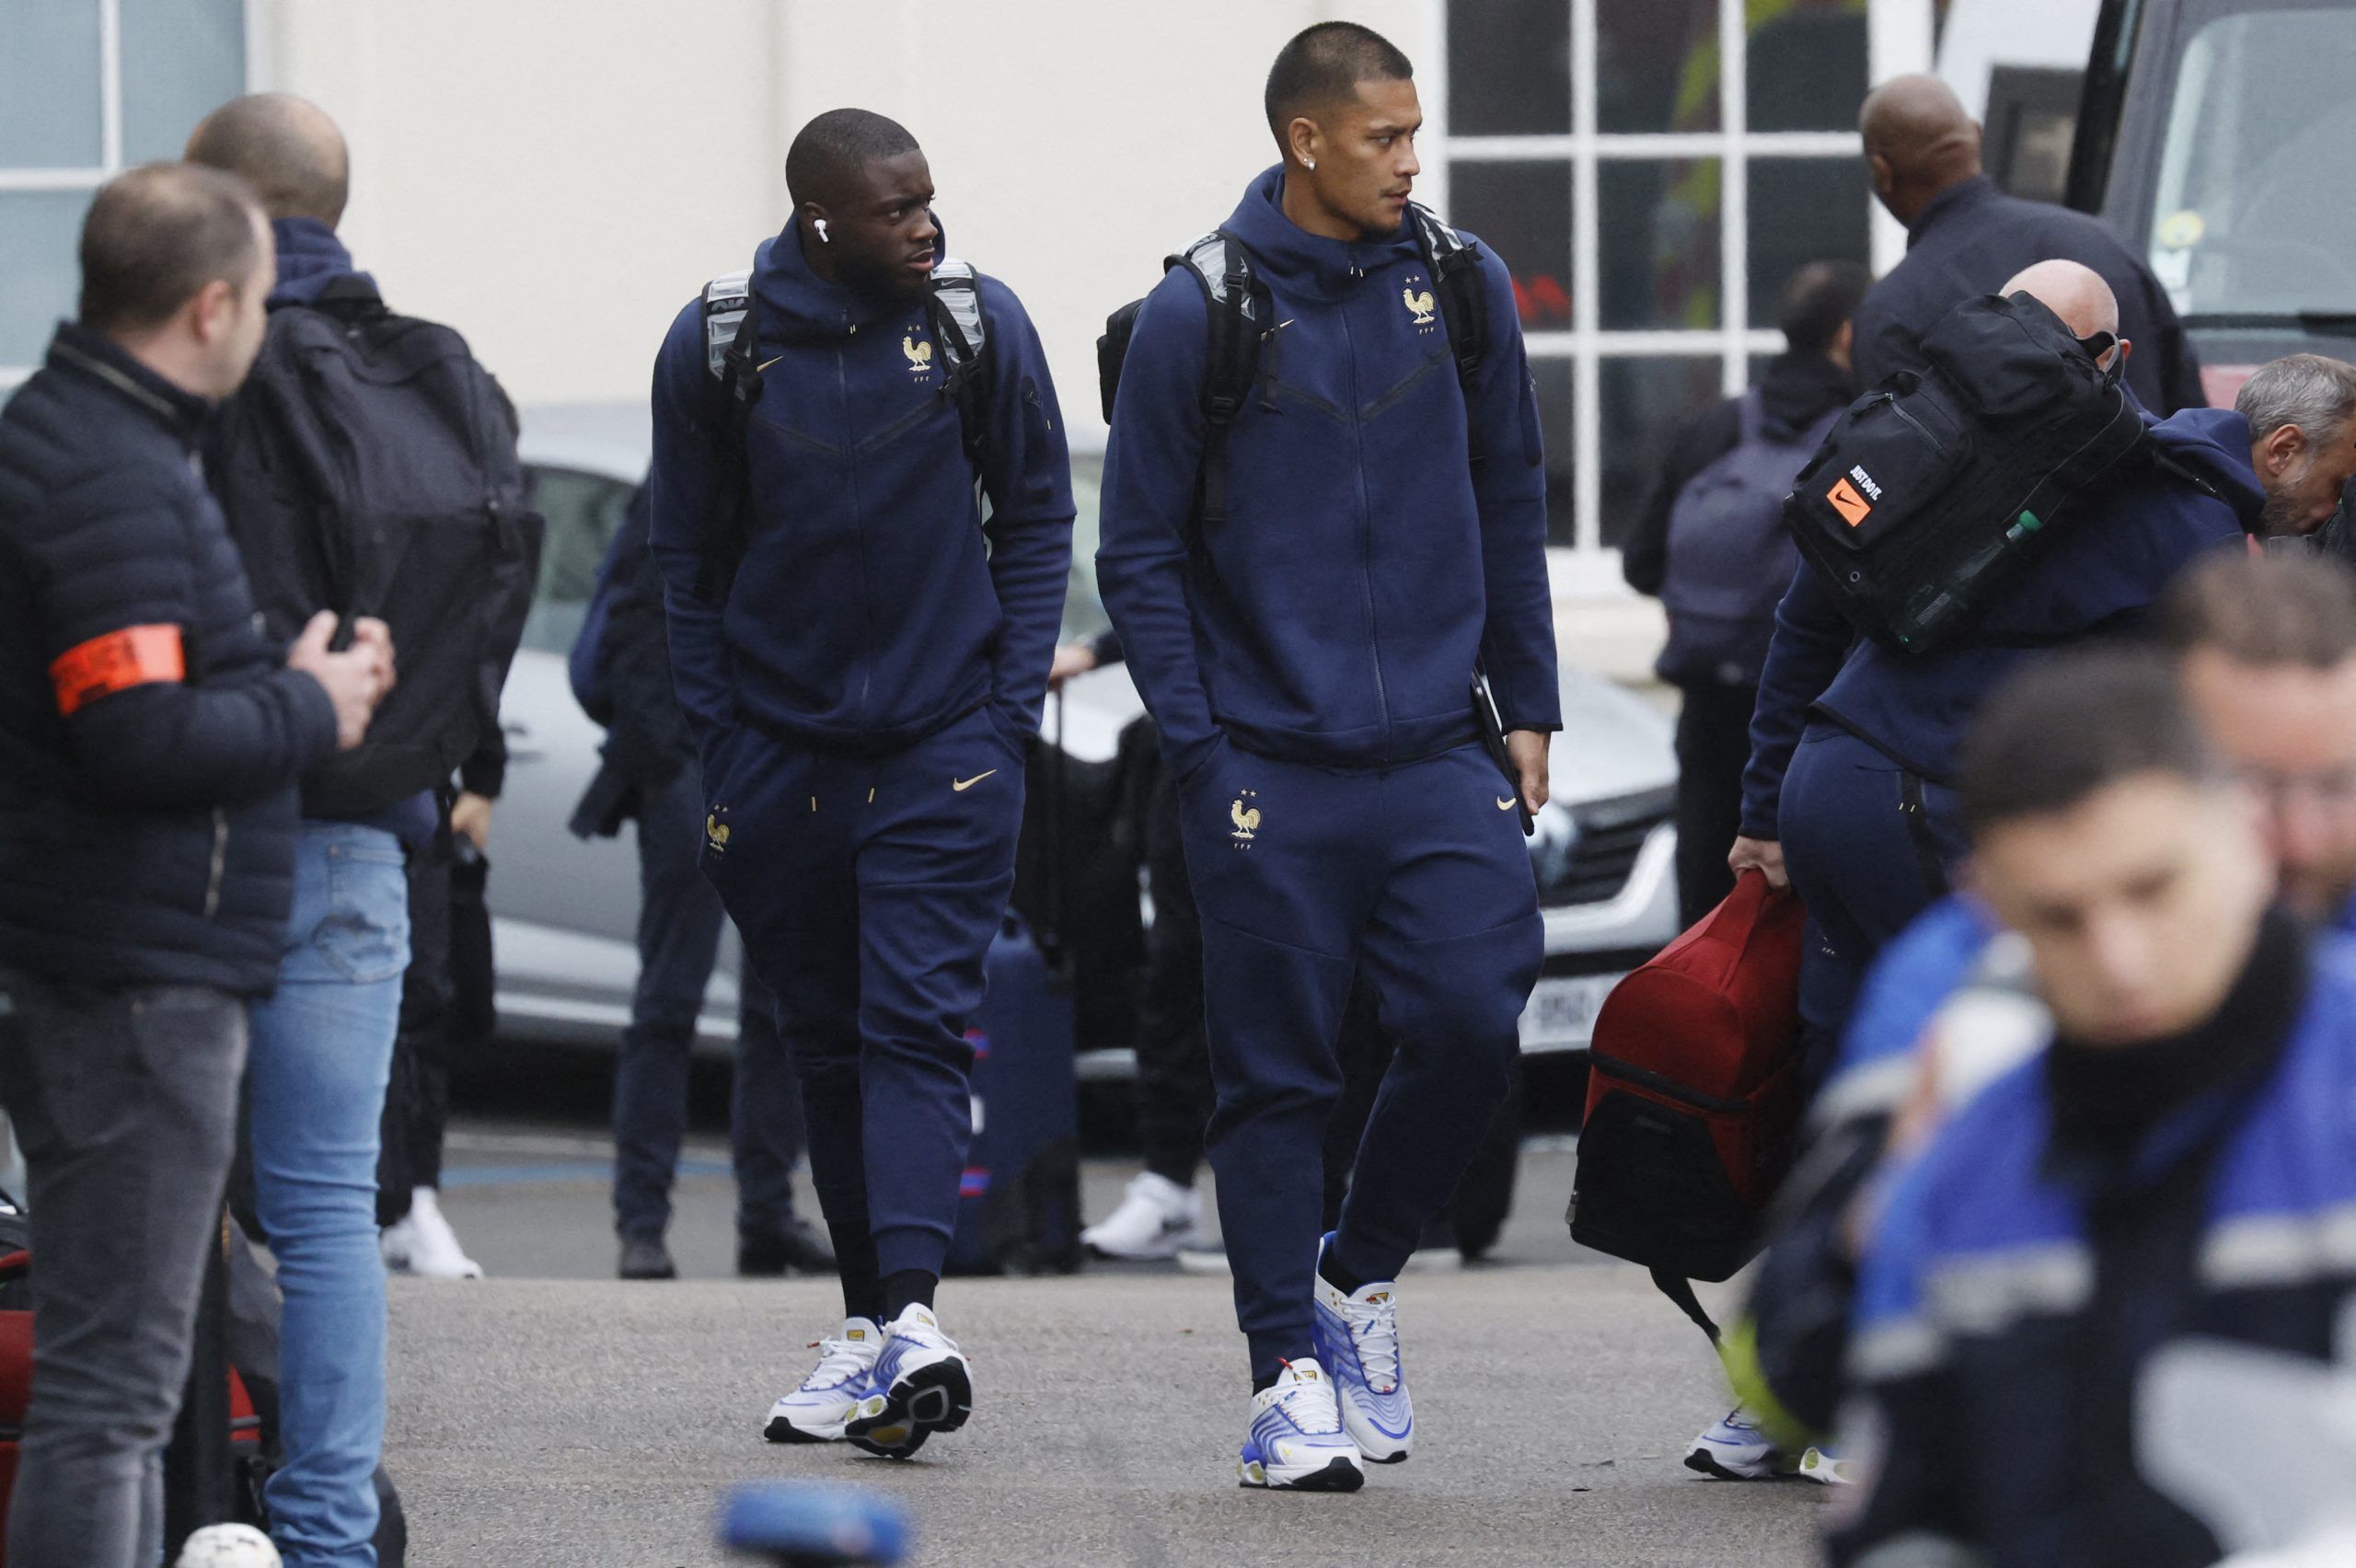 Soccer Football - FIFA World Cup Qatar 2022 - France Departure for Qatar - Le Bourget airport, Paris, France - November 16, 2022  France's Dayot Upamecano and Alphonse Areola arrive ahead of the departure for the FIFA World Cup Qatar 2022 REUTERS/Gonzalo Fuentes